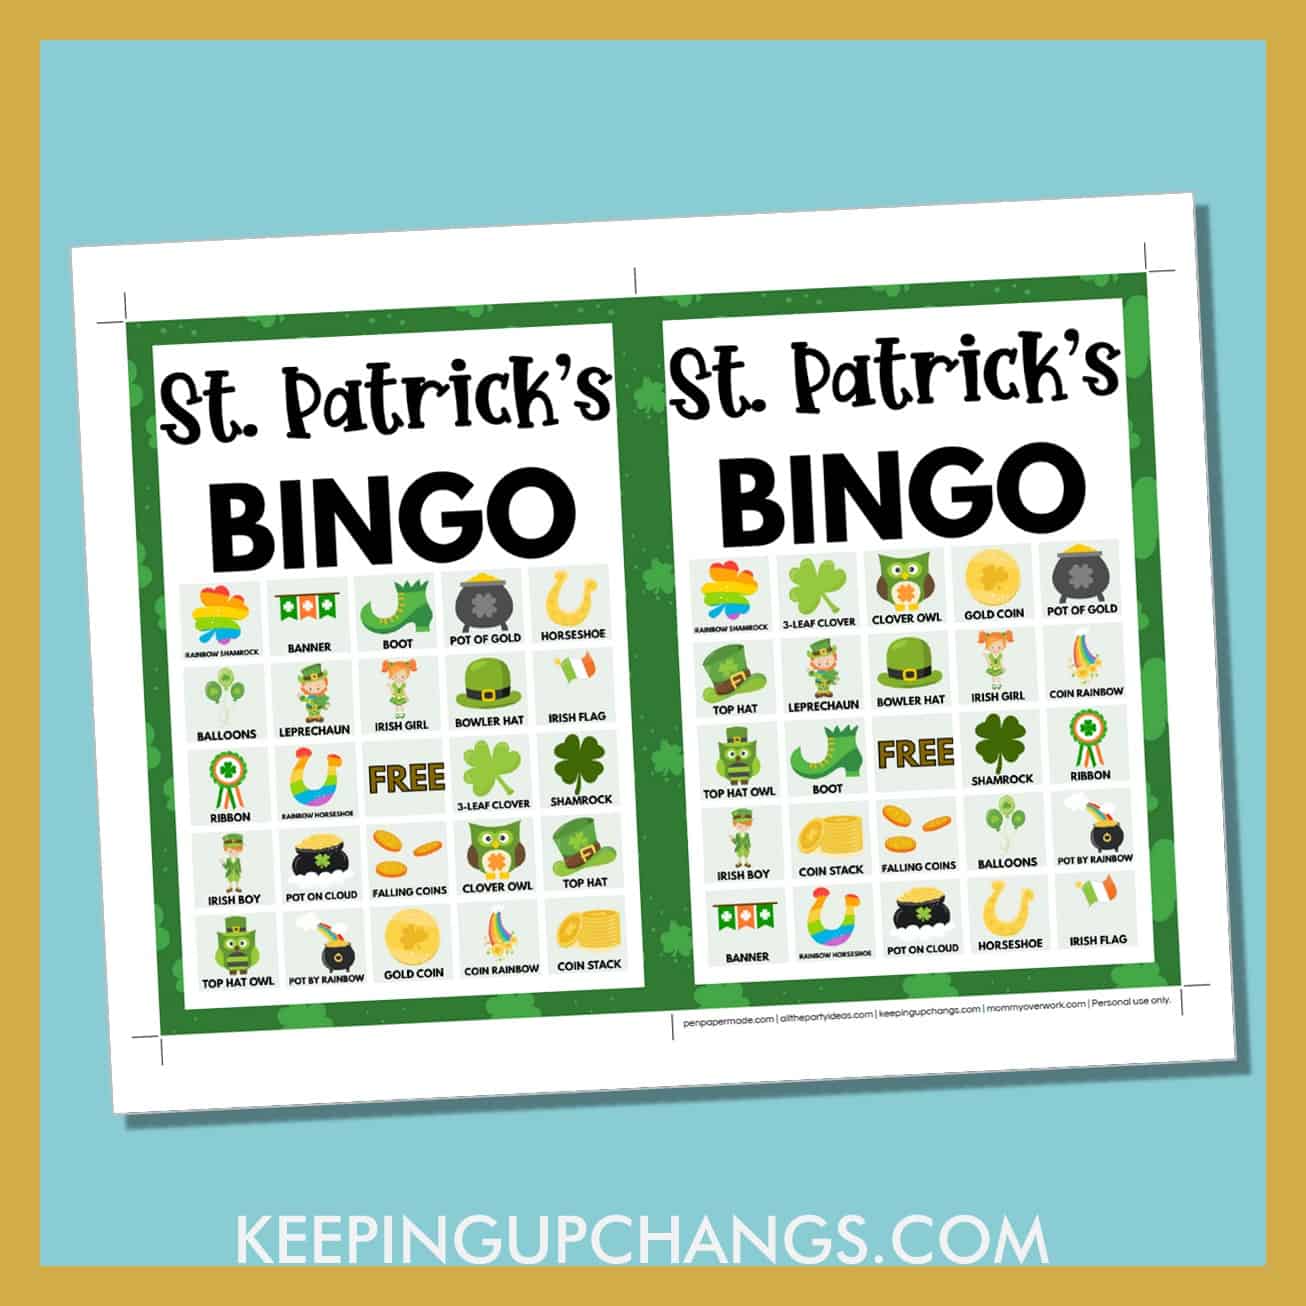 free st patrick's day bingo card 5x5 5x7 game boards with images and text words.